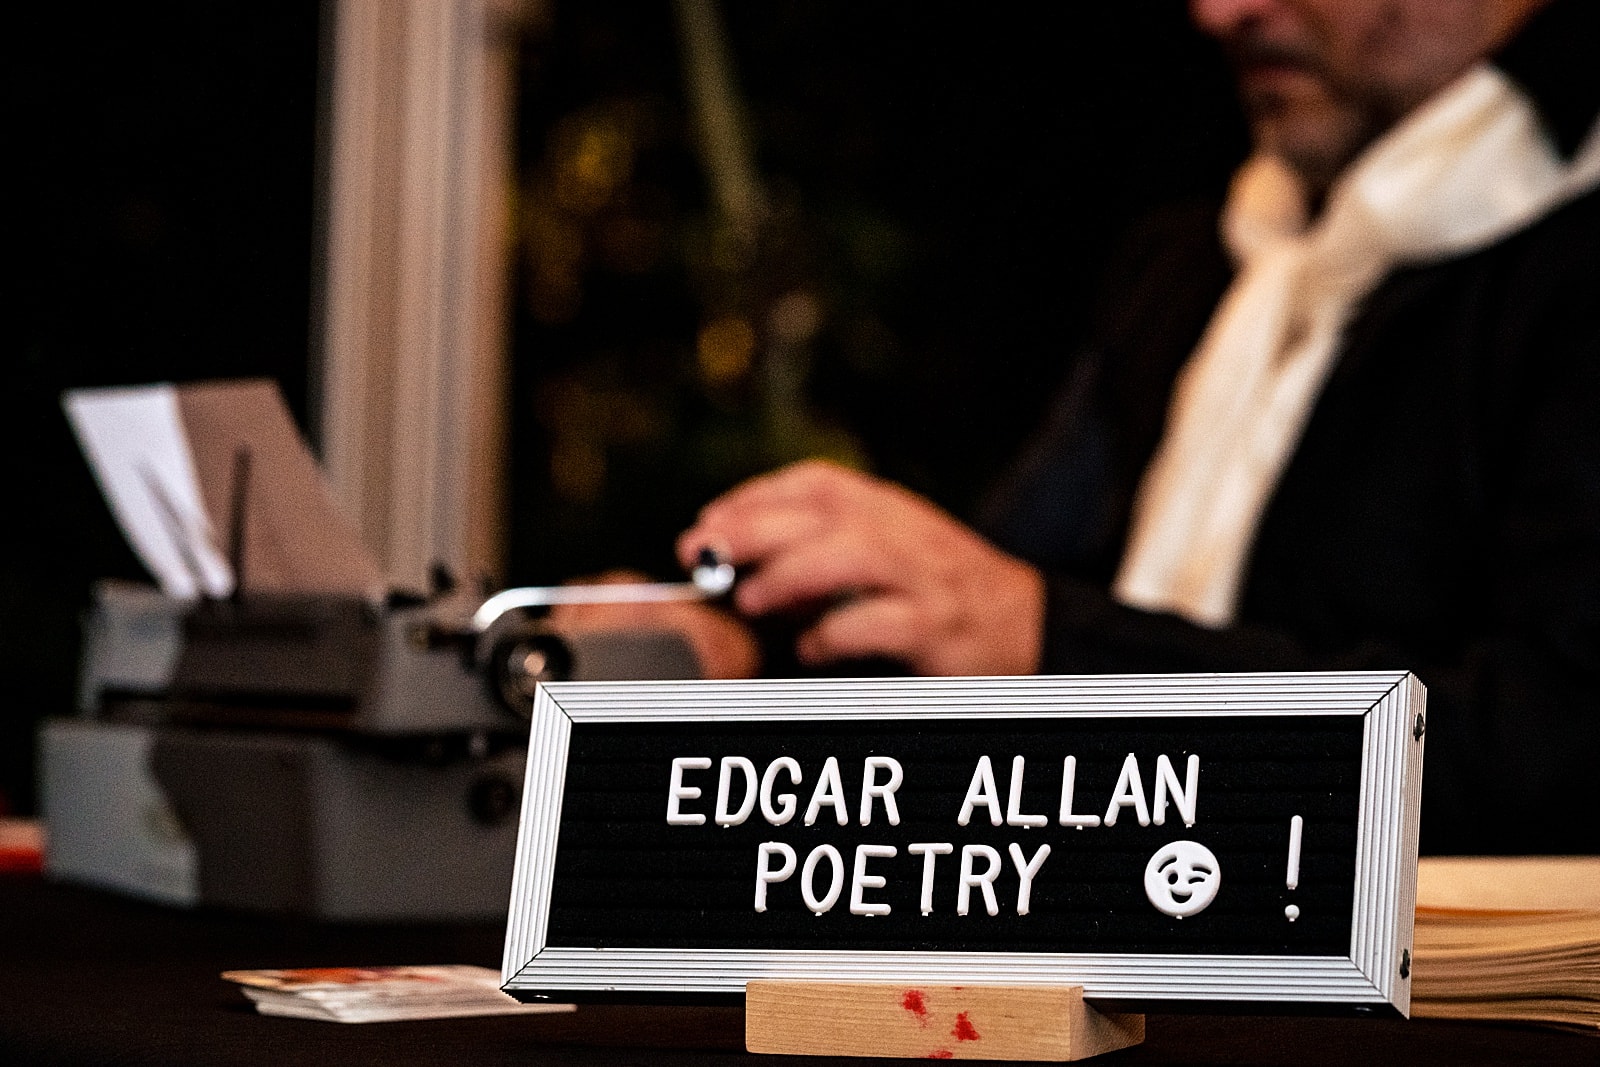 Edgar Allan Poe themed wedding with POEtry from Durham's Poetry Fox